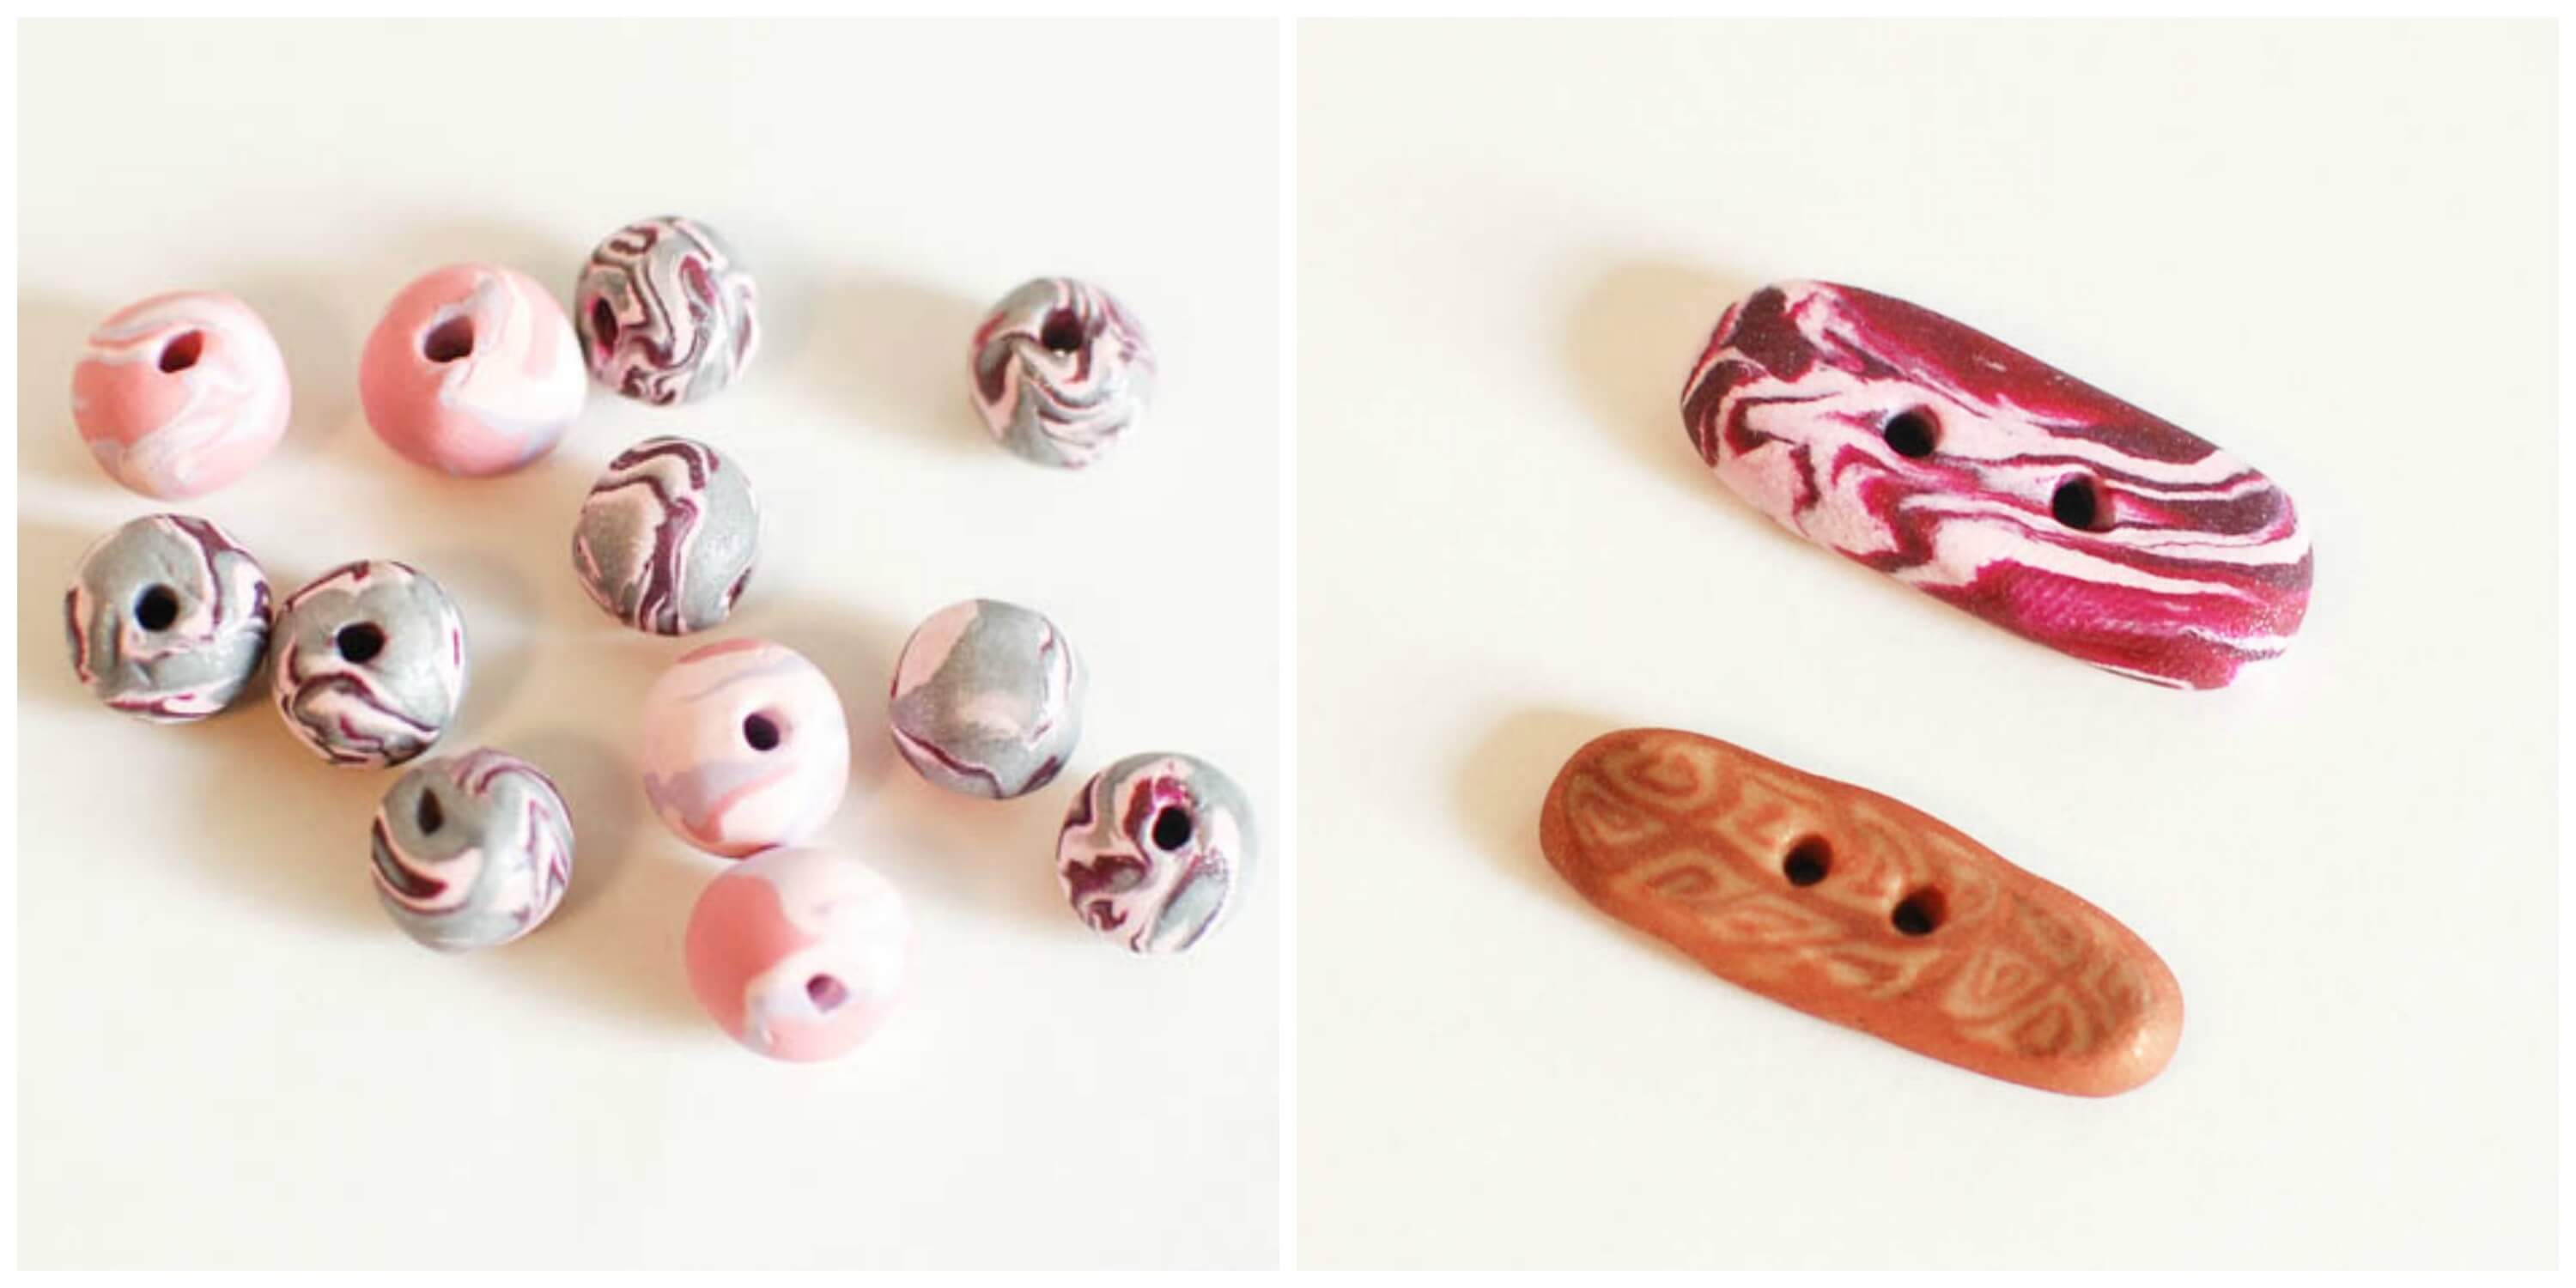 Polymer Clay Crochet Hook Handles and Buttons - Petals to Picots